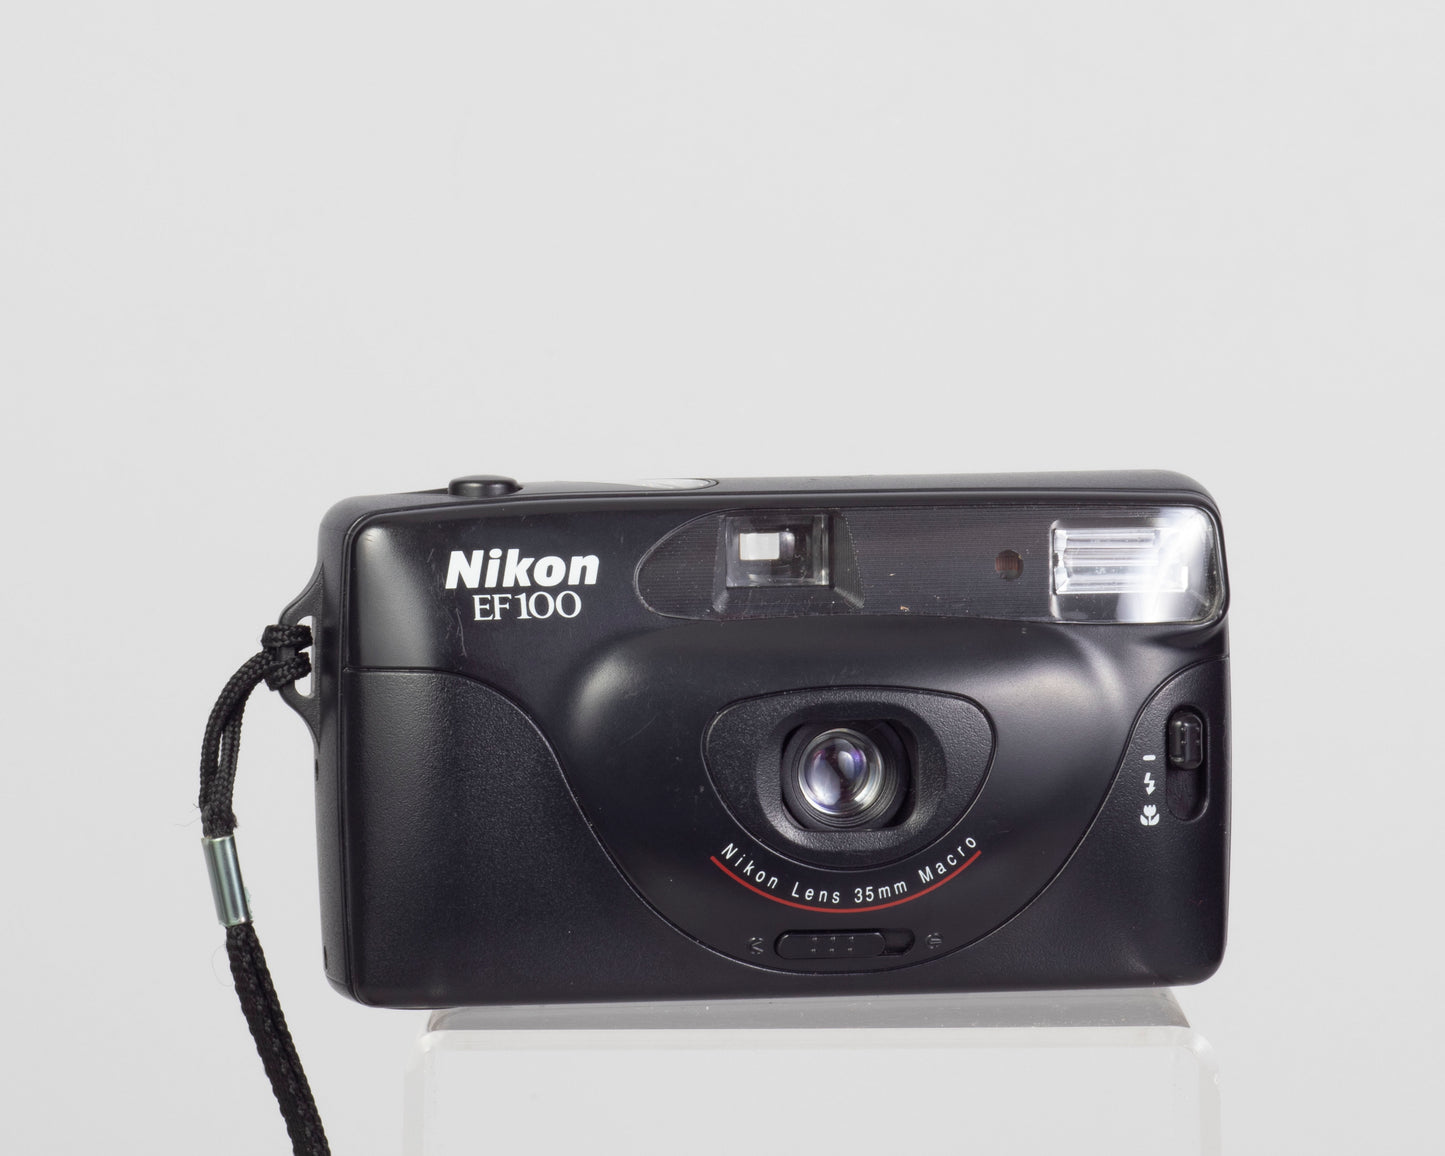 The Nikon EF100 aka Nice Touch 2, a focus free 35mm point-and-shoot camera